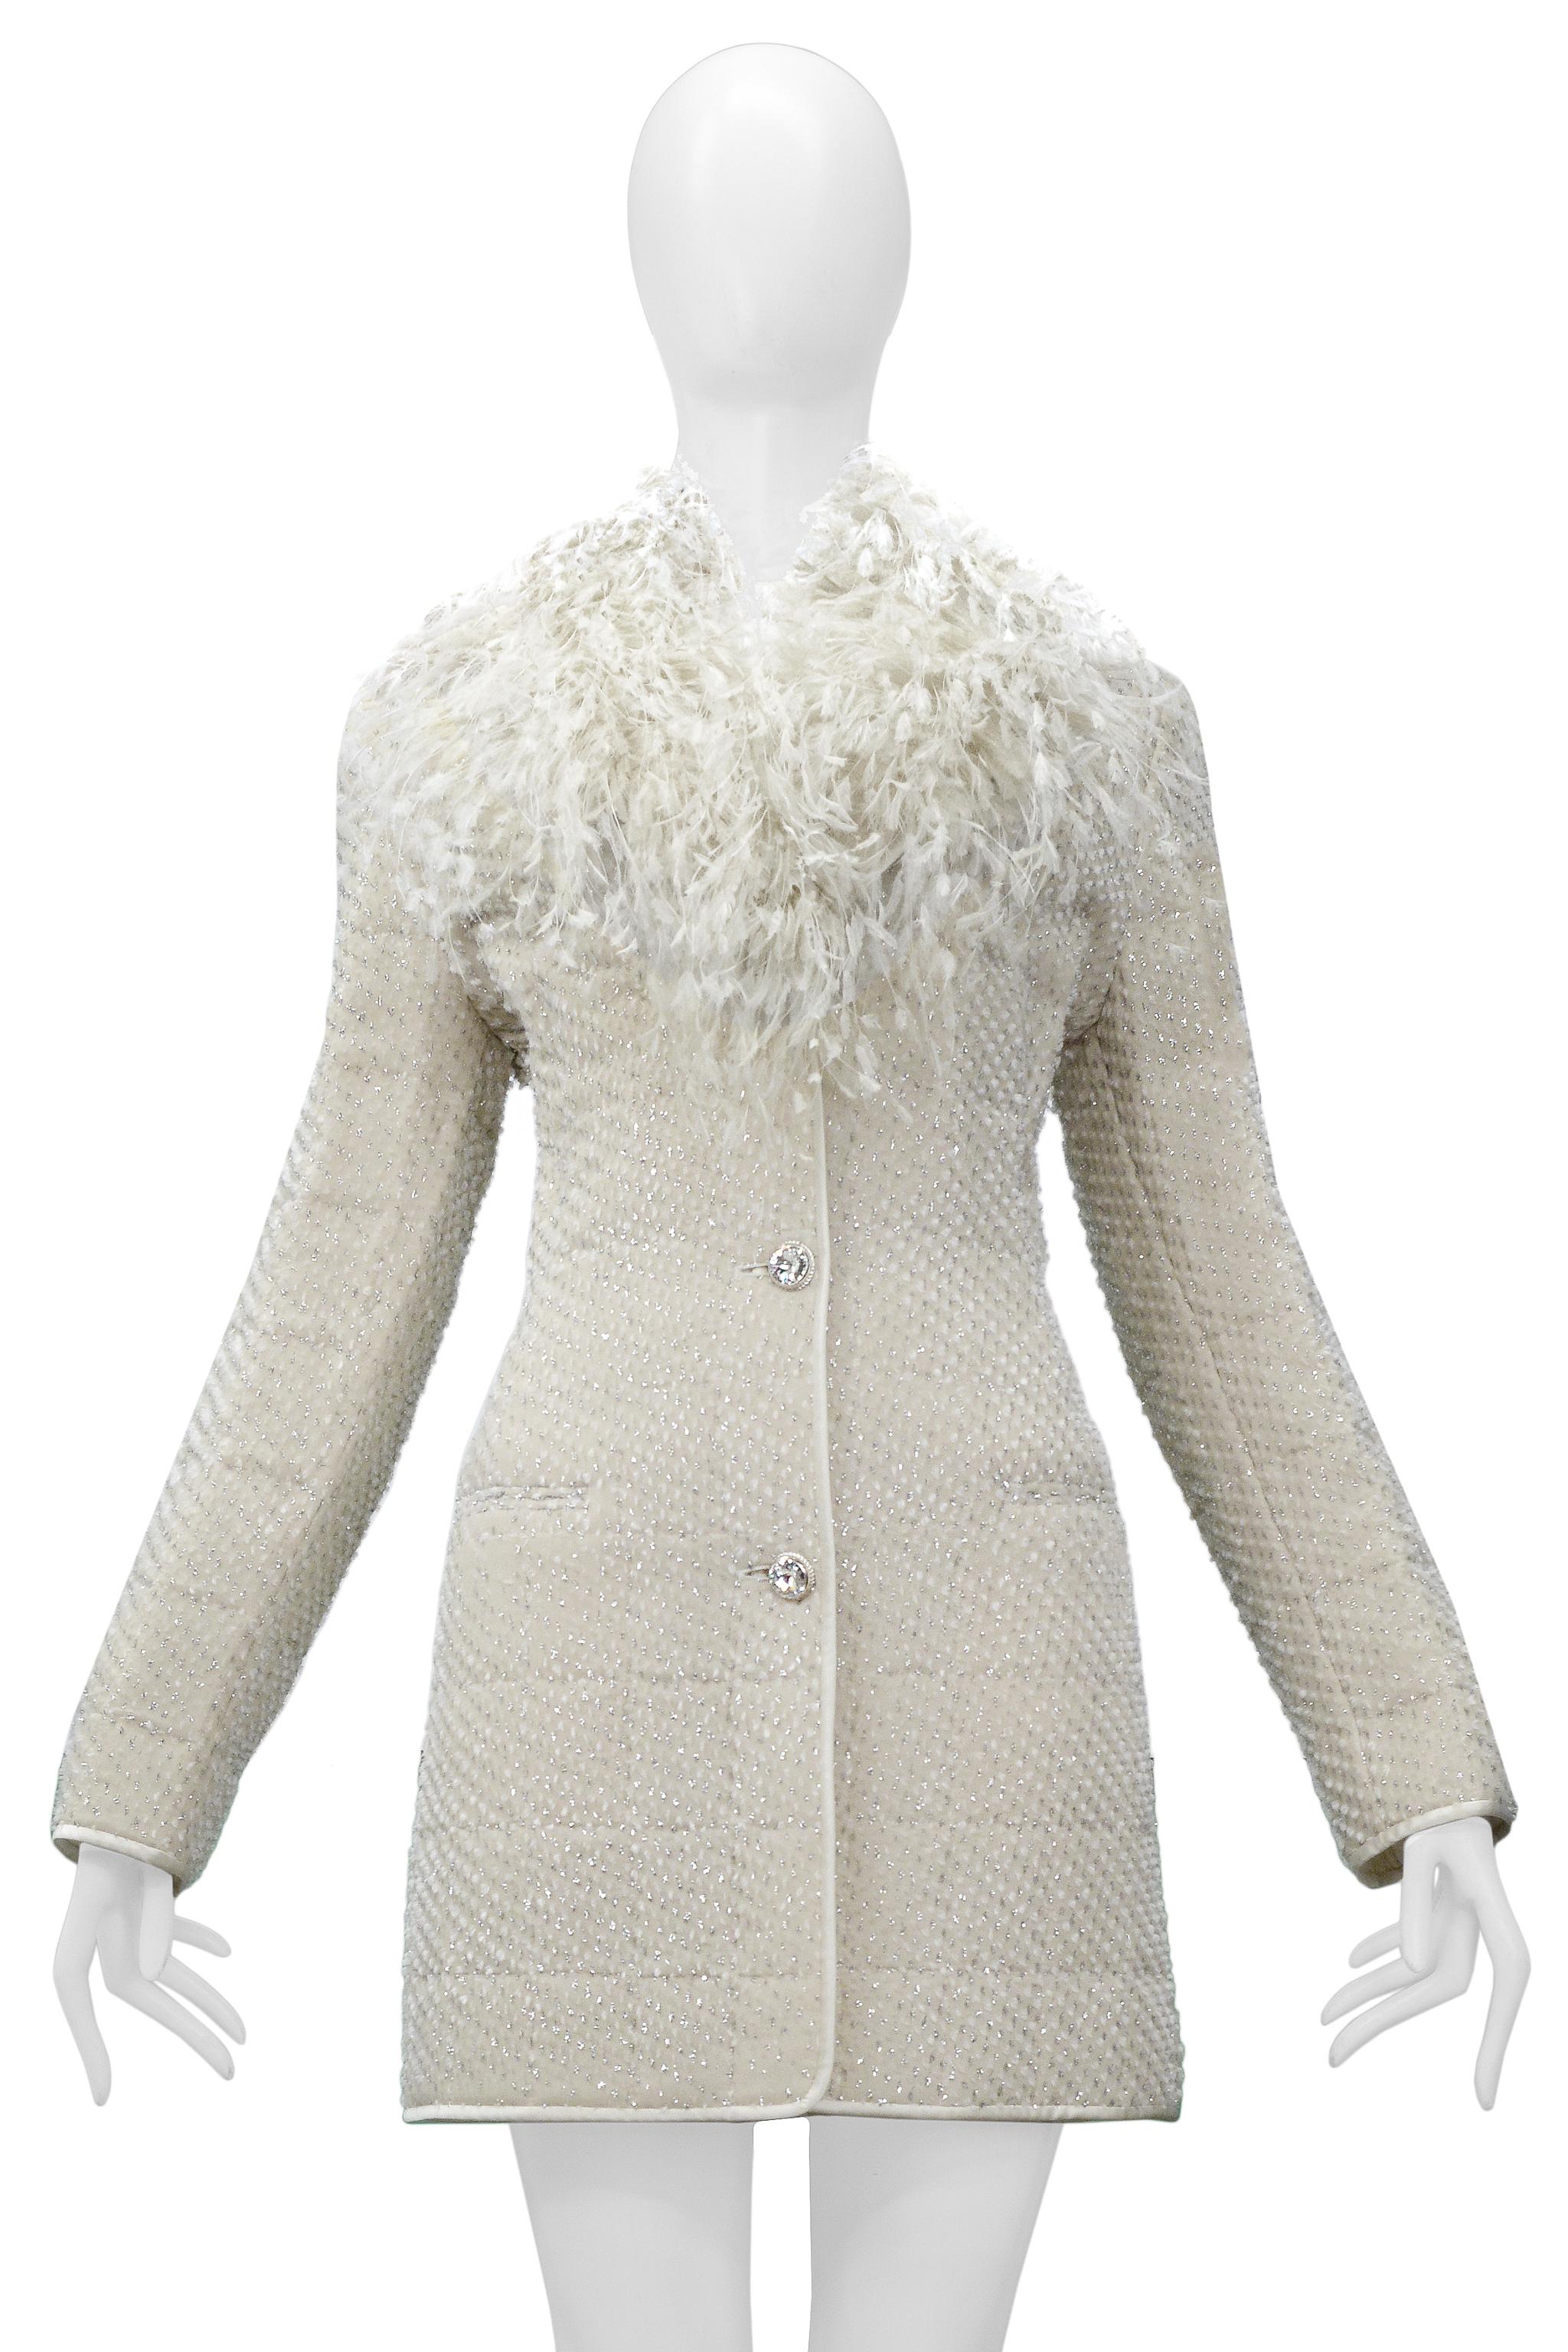 Resurrection Vintage is excited to offer a vintage Gianfranco Ferre off-white silk evening coat with rhinestone buttons, contrasting satin trim, silver metallic threads, padded body, silk lining, and feathers around the collar. 

Gianfranco